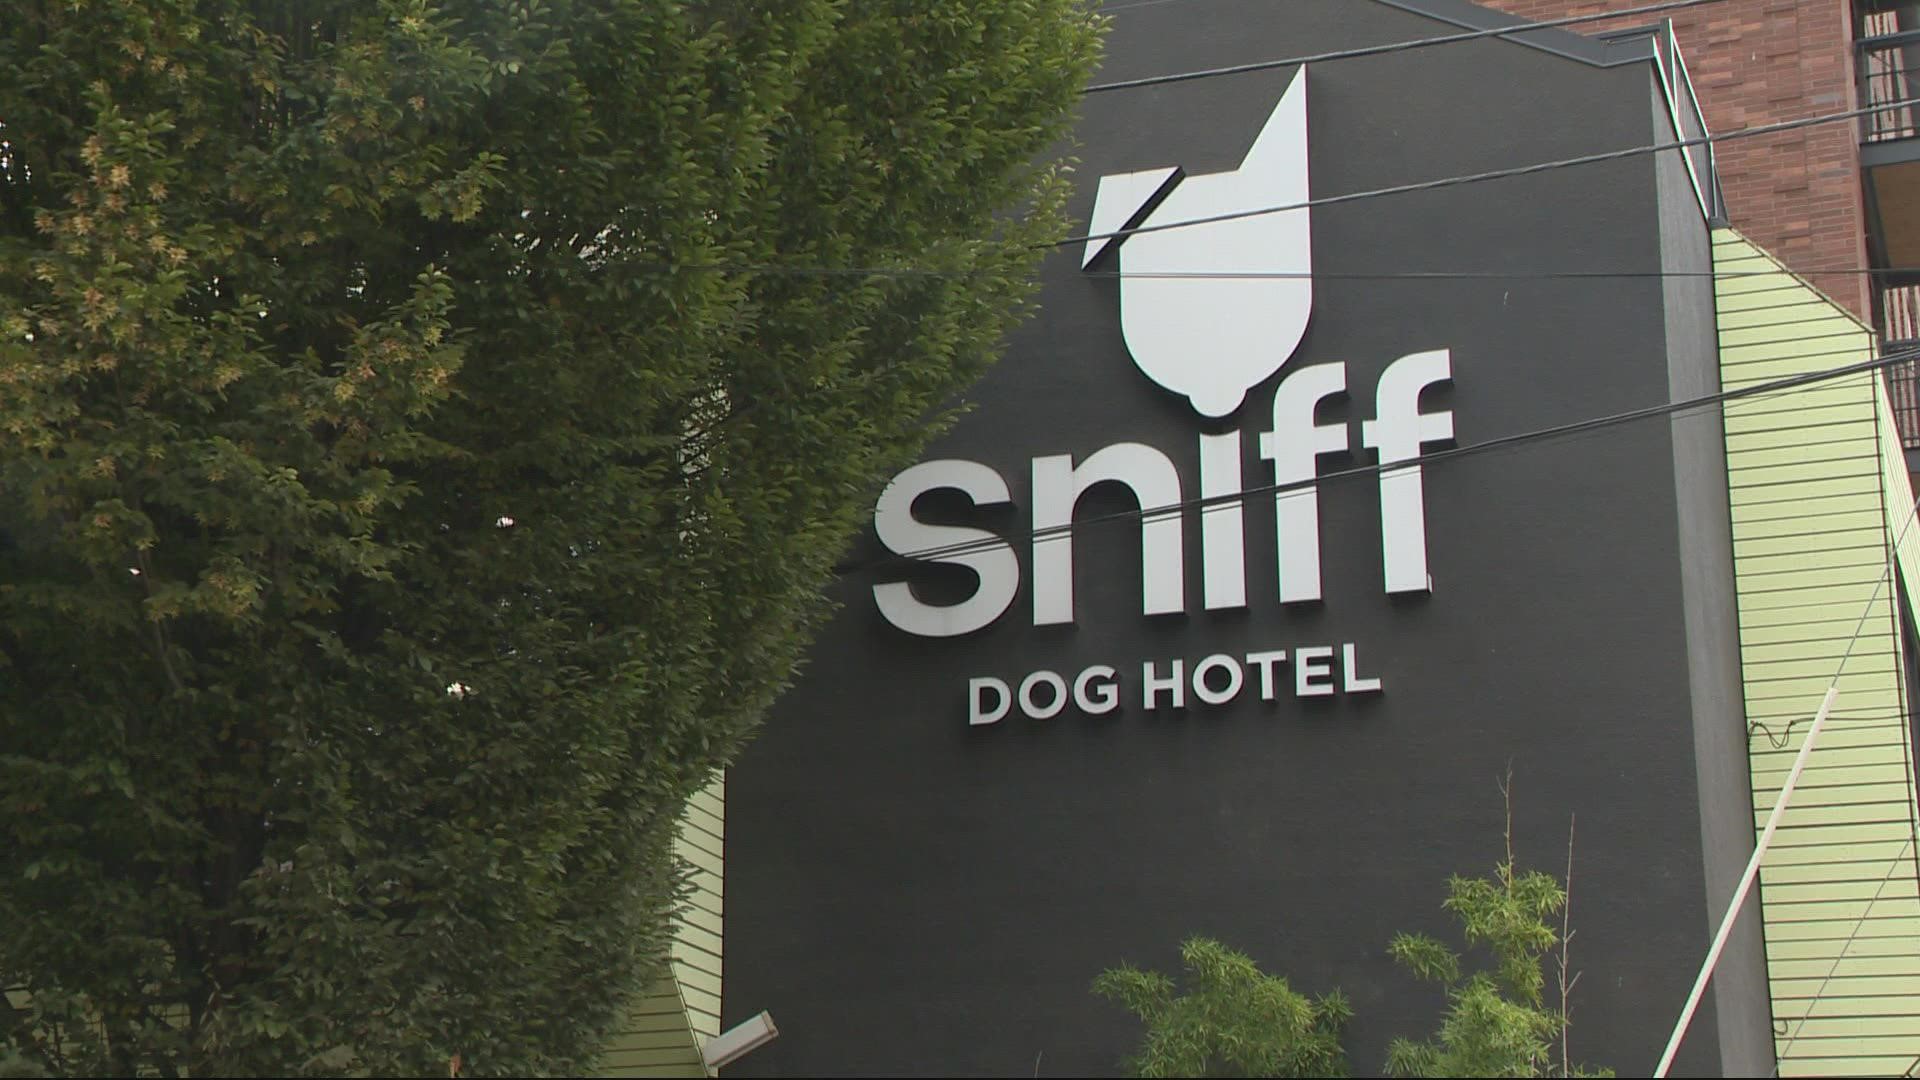 Cory Murry owns of Sniff Dog Hotel. Murry said he waited nearly two hours for police to respond after a man physically threatened staff and customers.